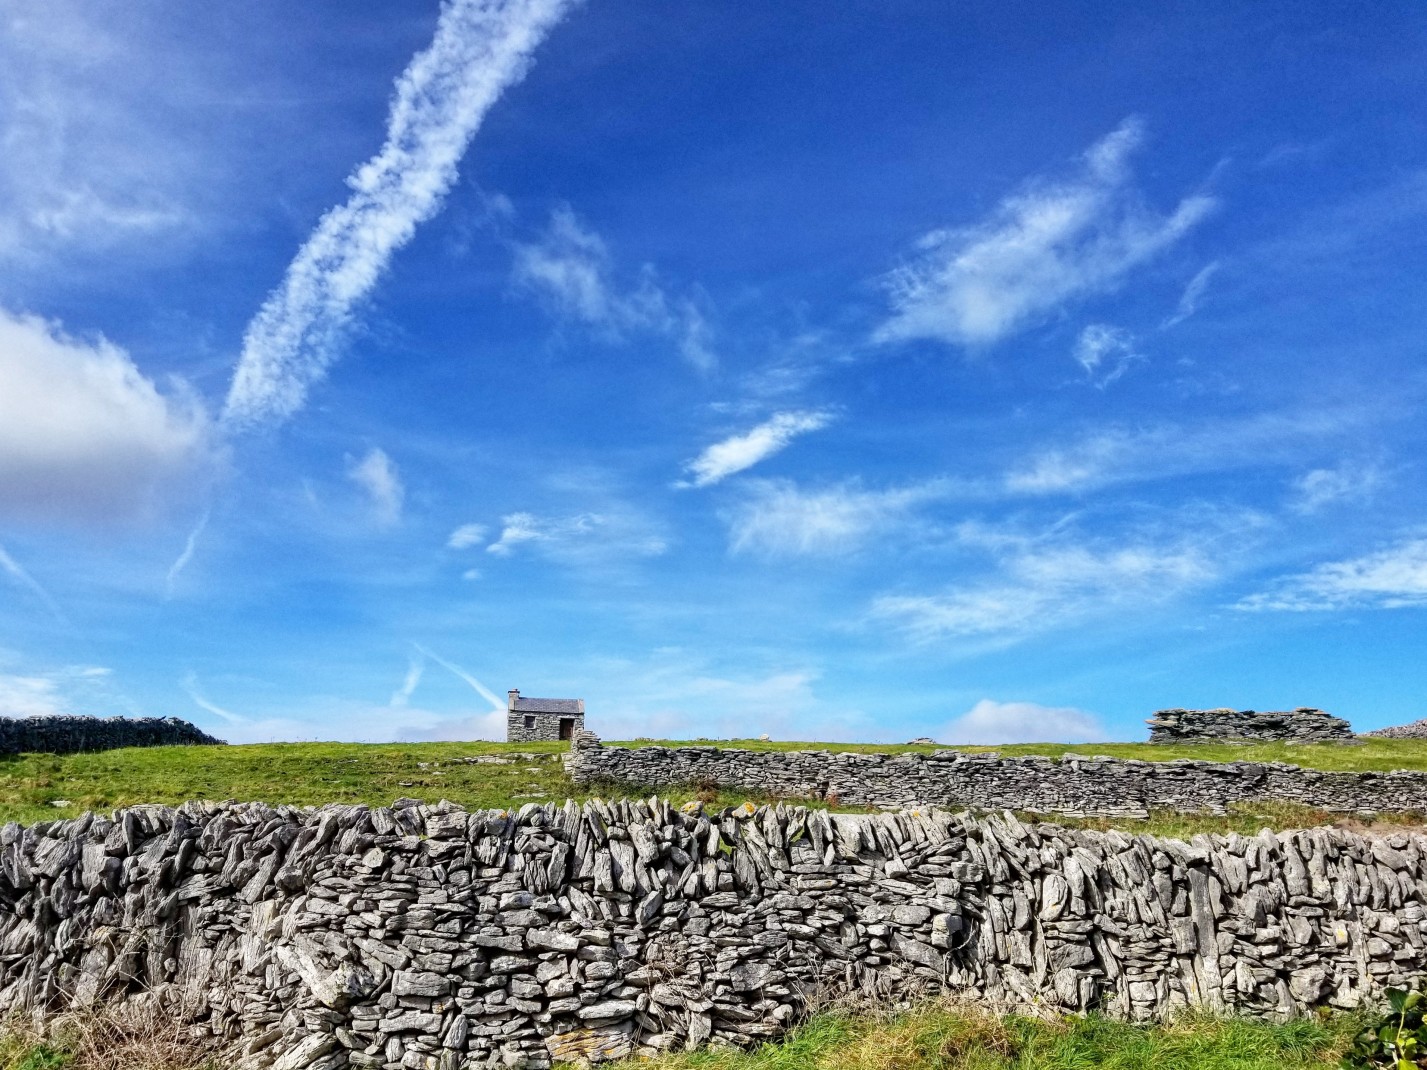 Stone wall on grassy field with blue skies during daytime